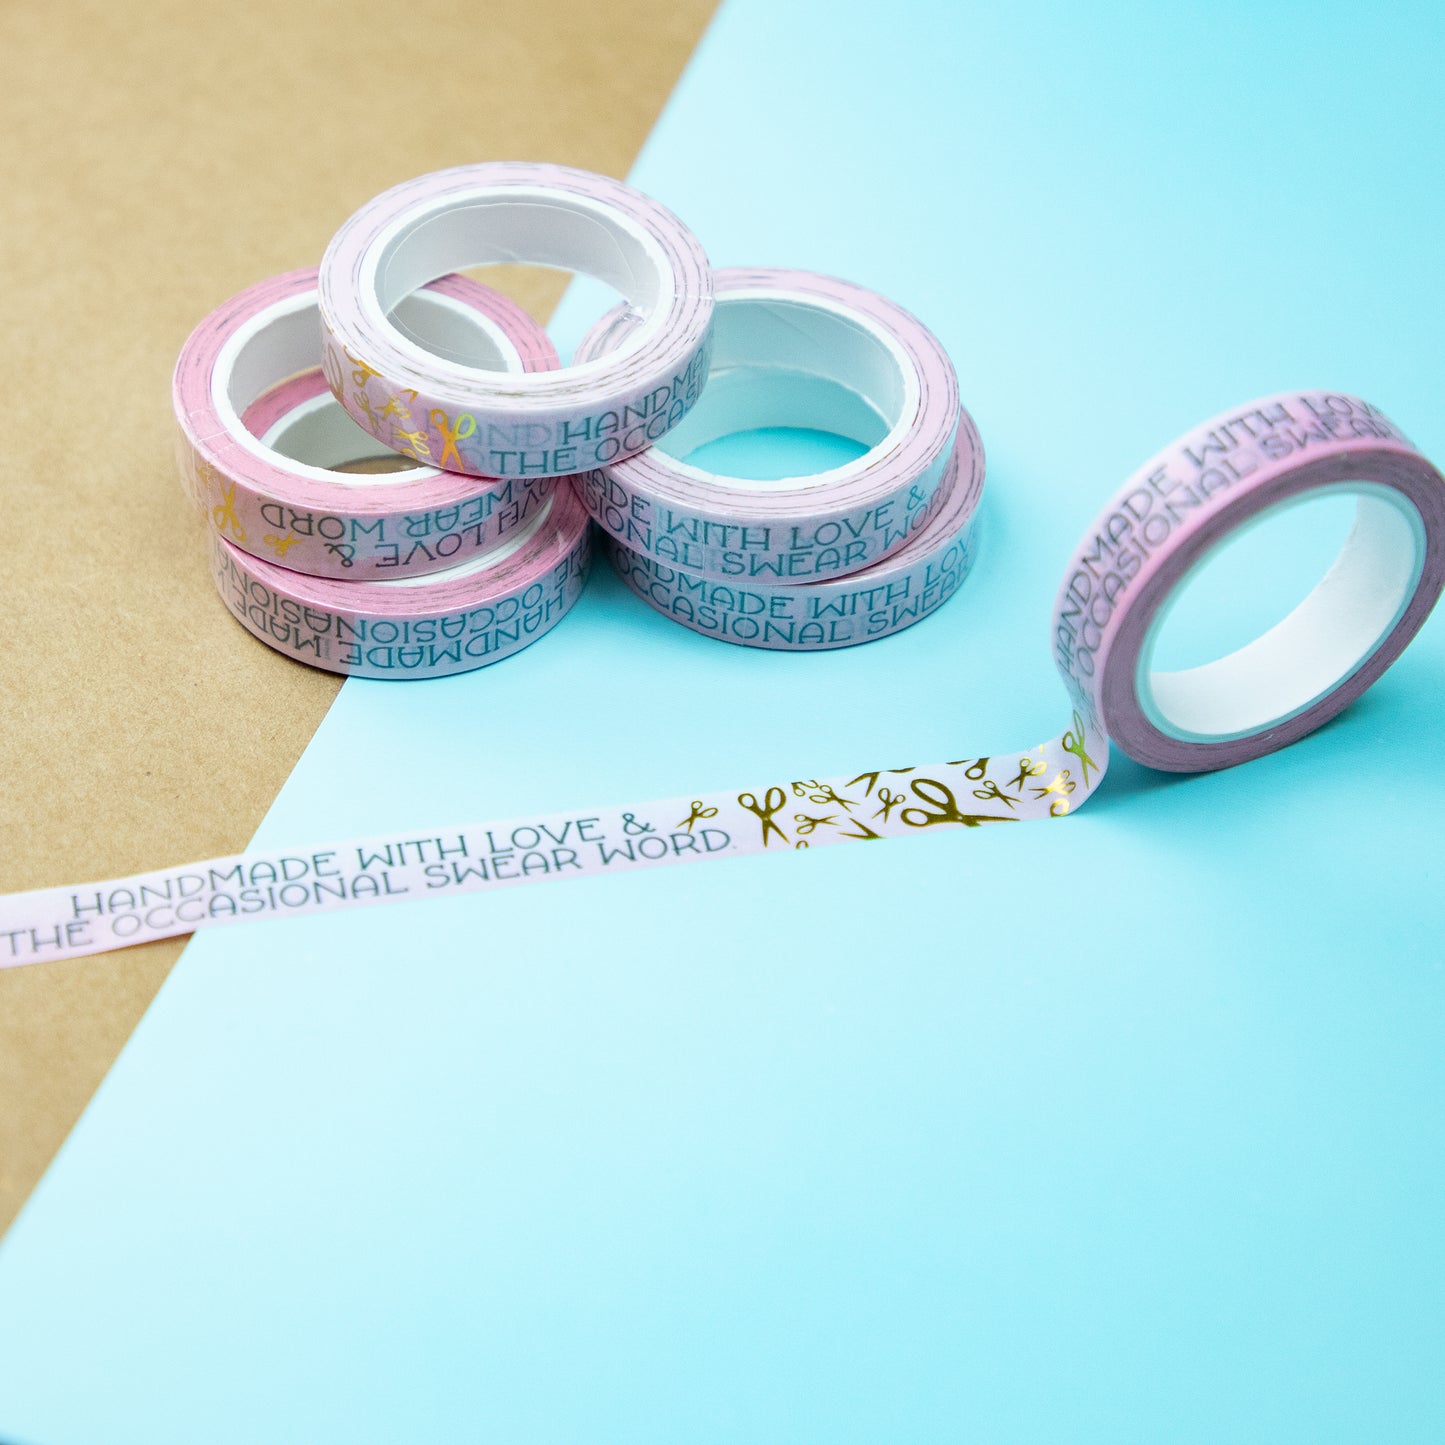 Handmade with the Occasional Swear Word Washi Tape